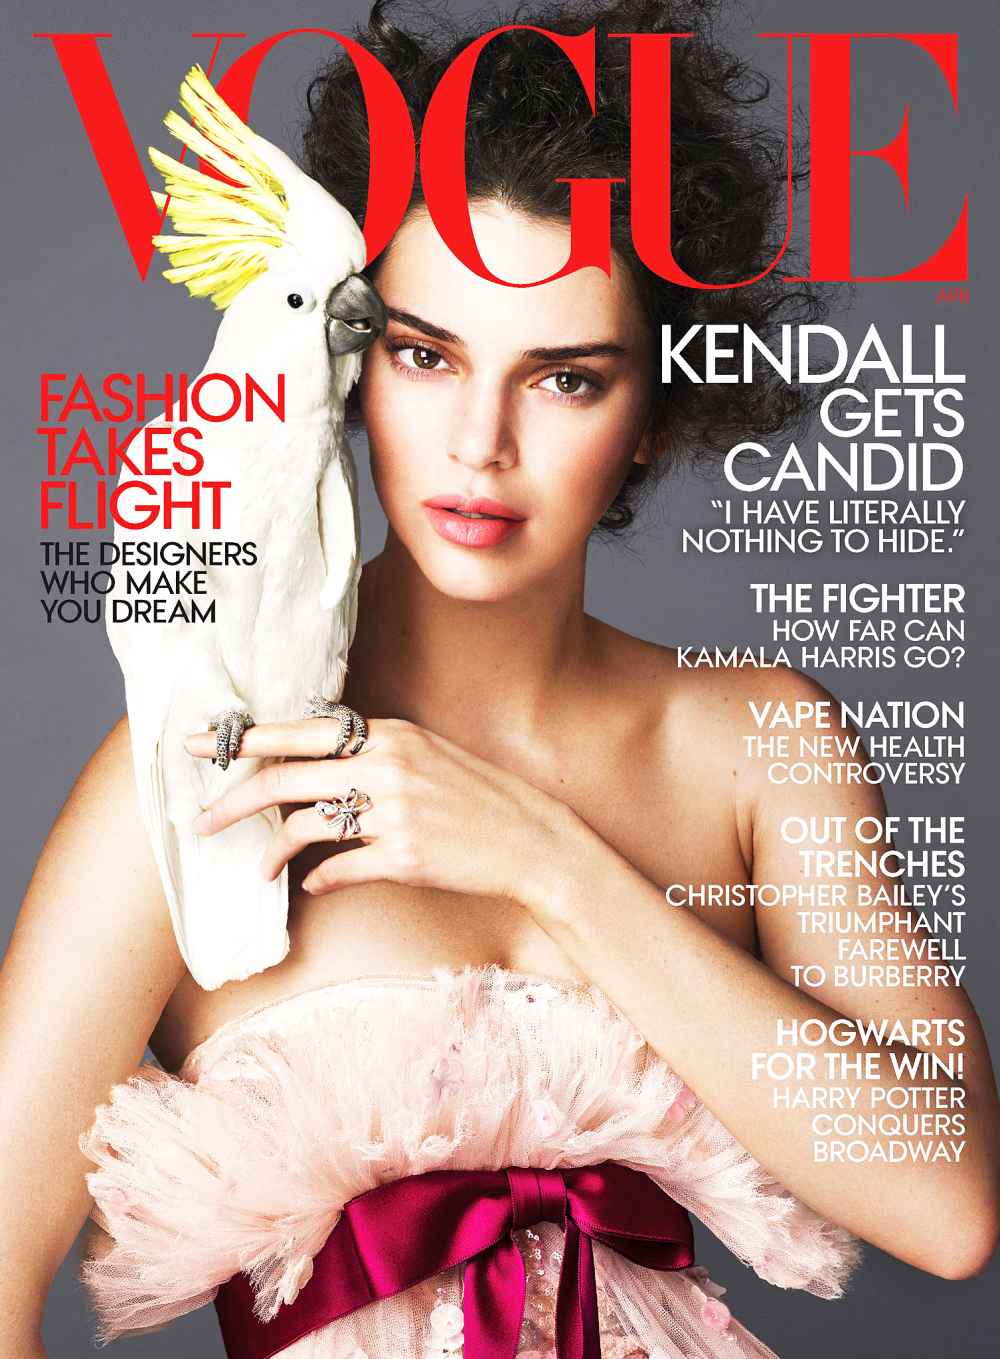 Kendall Jenner VOGUE cover